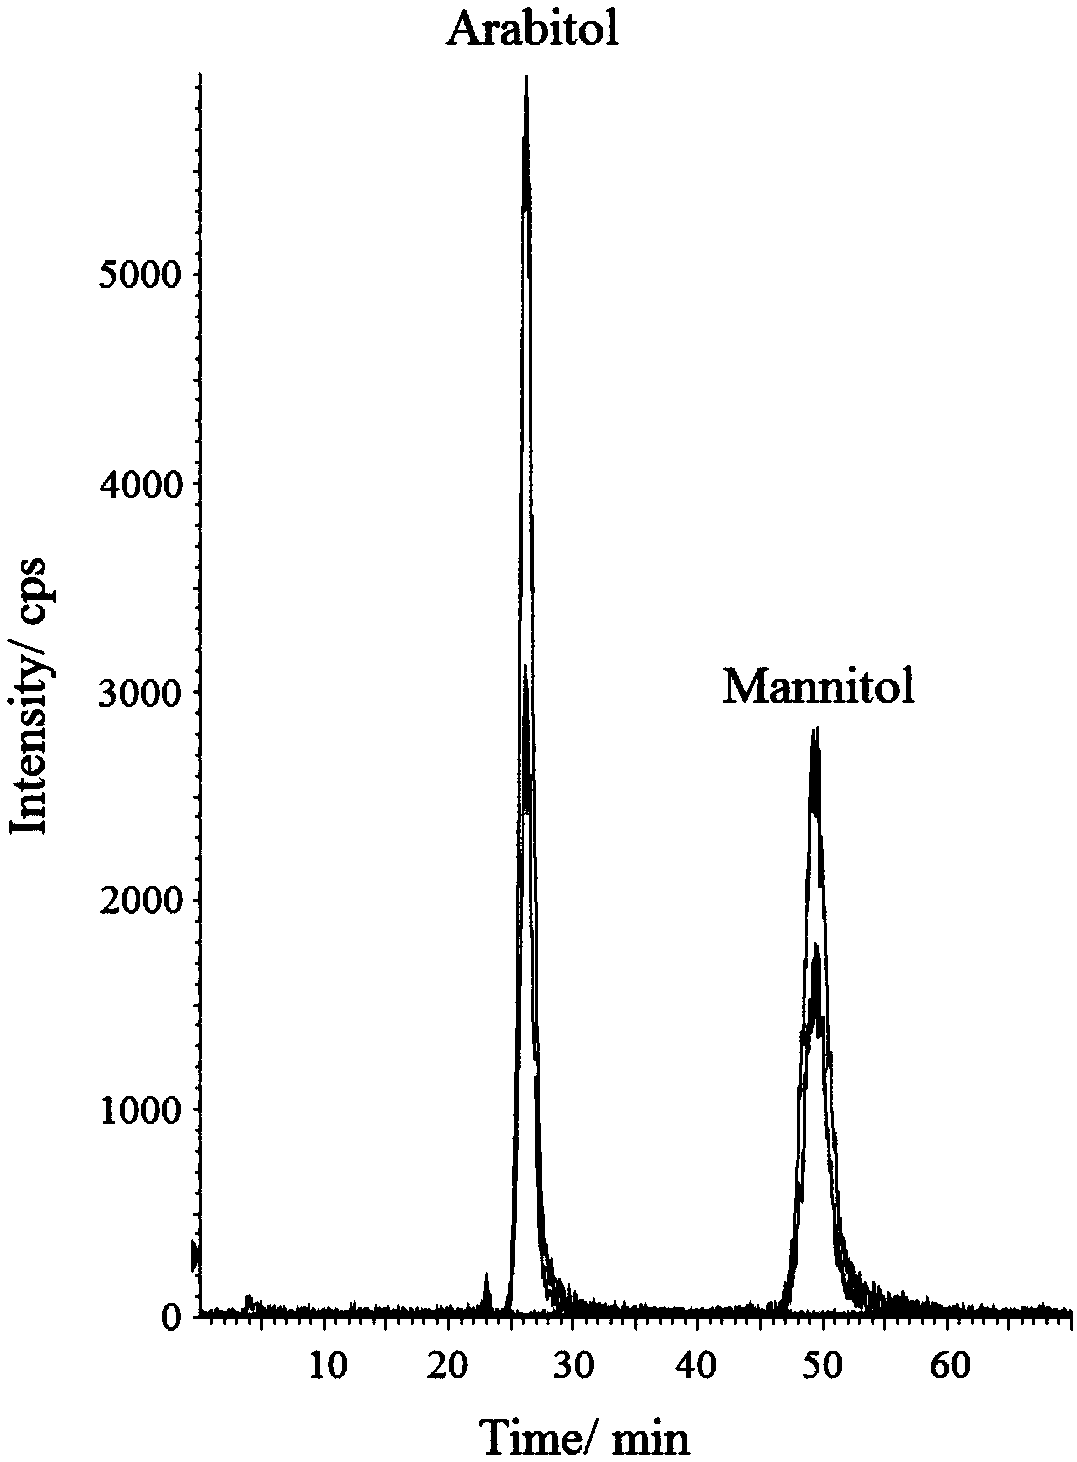 Method for rapidly determining arabitol and mannitol in aerosol